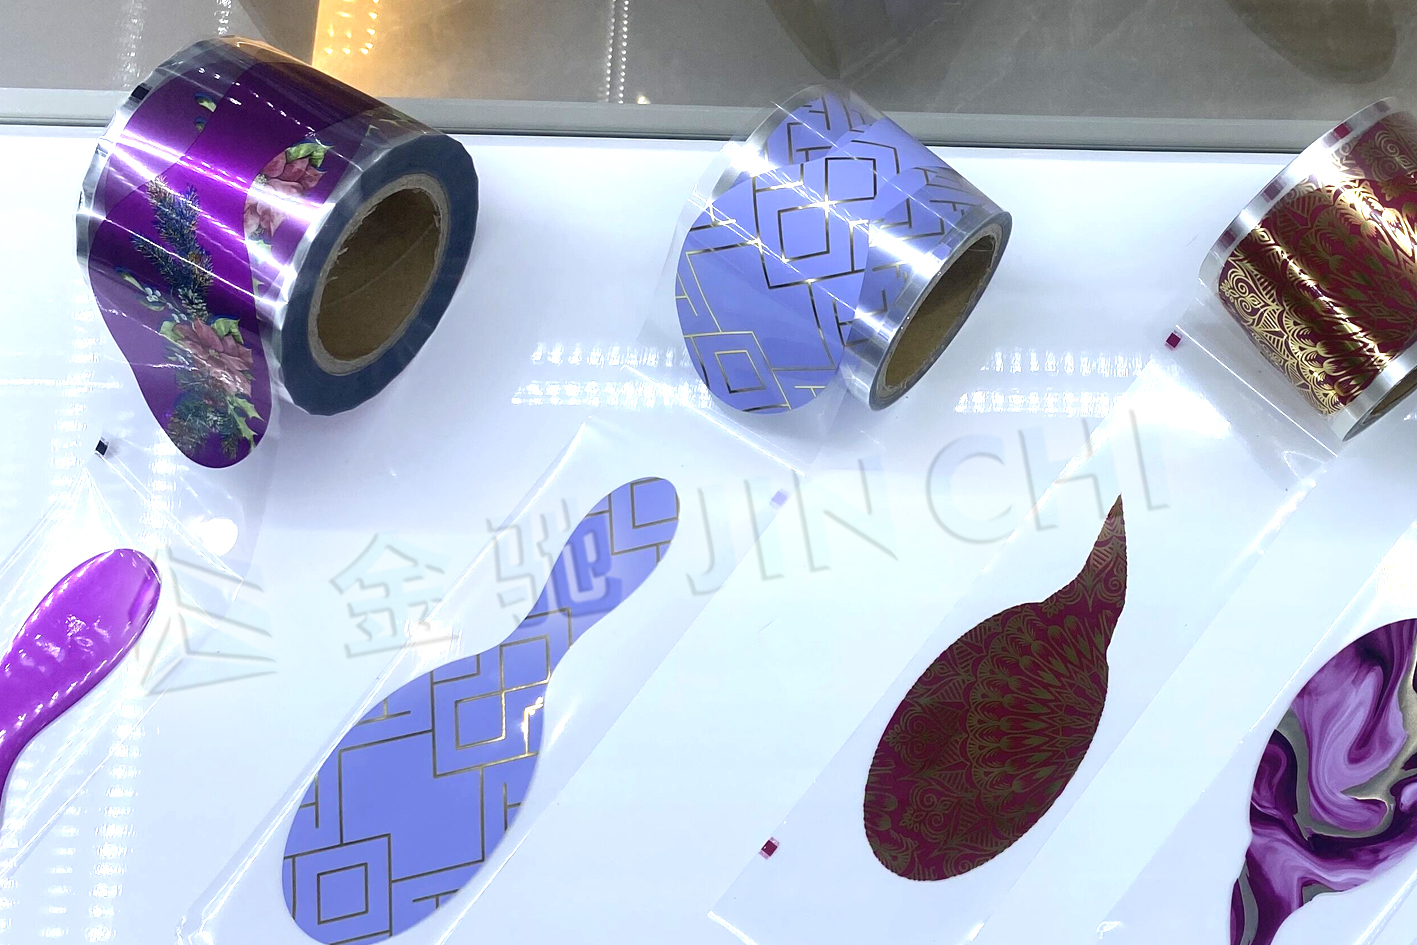 What kind of ink is suitable for thermal transfer processing